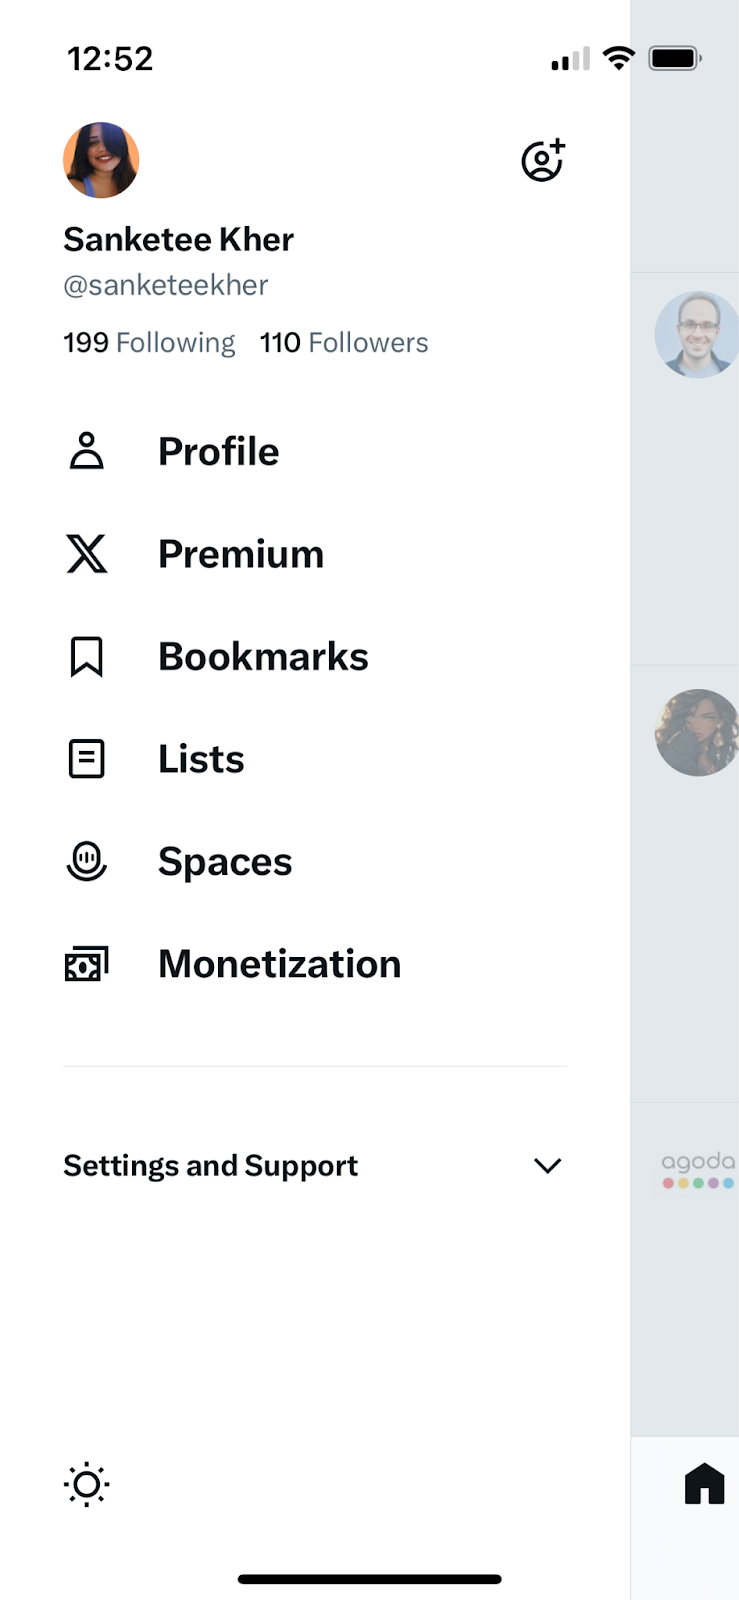 How to check profile views on Twitter on mobile?